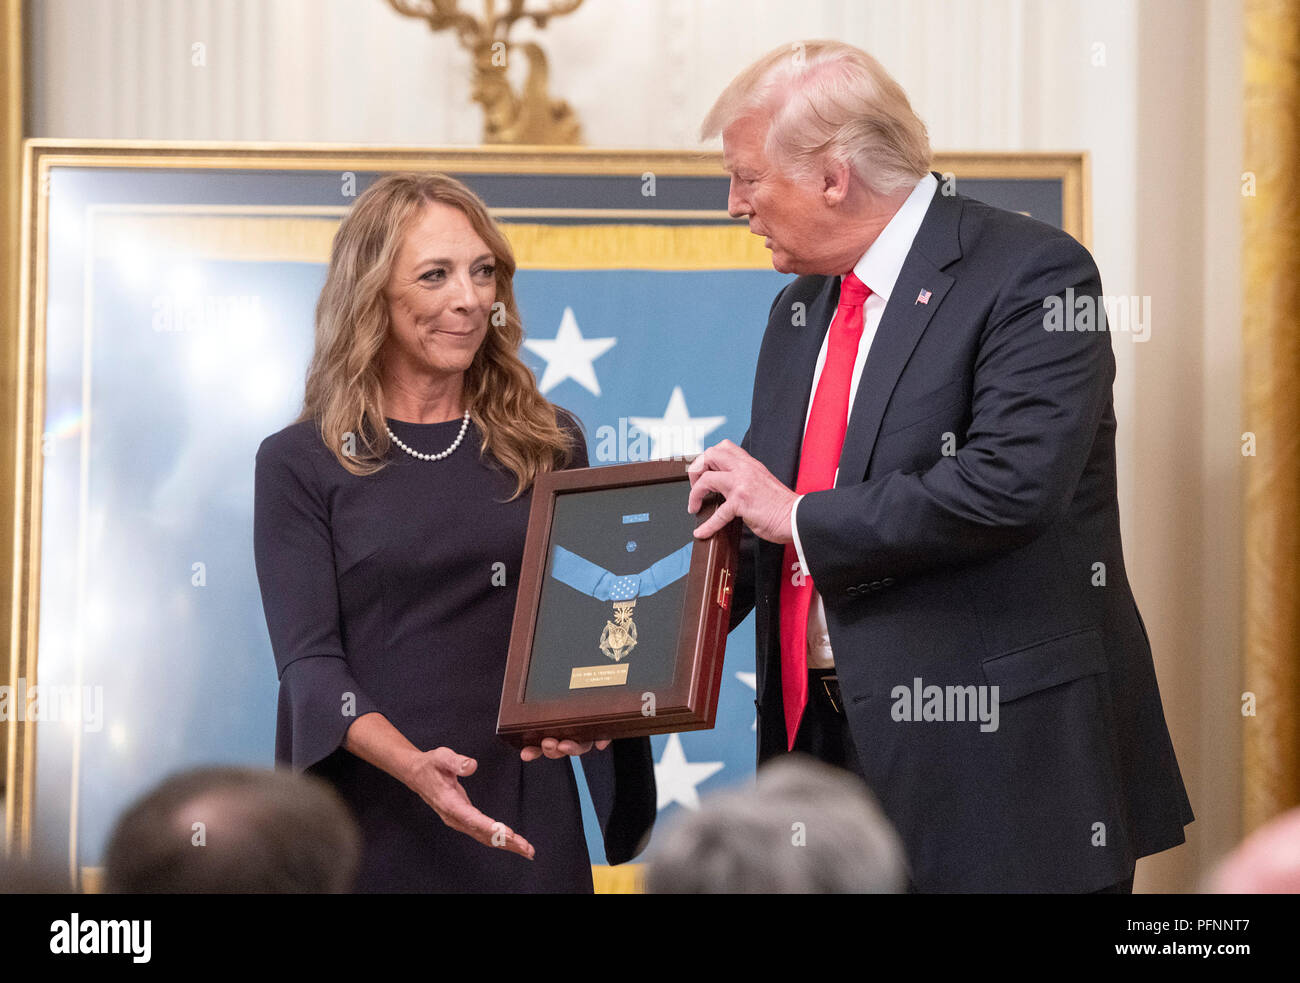 Valerie Nessel, widow of Technical Sergeant John A. Chapman, United States Air Force, left, stands with US President Donald J. Trump, center, as she accepts the Medal of Honor posthumously from the President during a ceremony in the East Room of the White House in Washington, DC on Wednesday, August 22, 2018. Sergeant Chapman is being honored for his actions on March 4, 2002, on Takur Ghar mountain in Afghanistan where he gave his life to save his teammates. Credit: Ron Sachs/CNP | usage worldwide Stock Photo